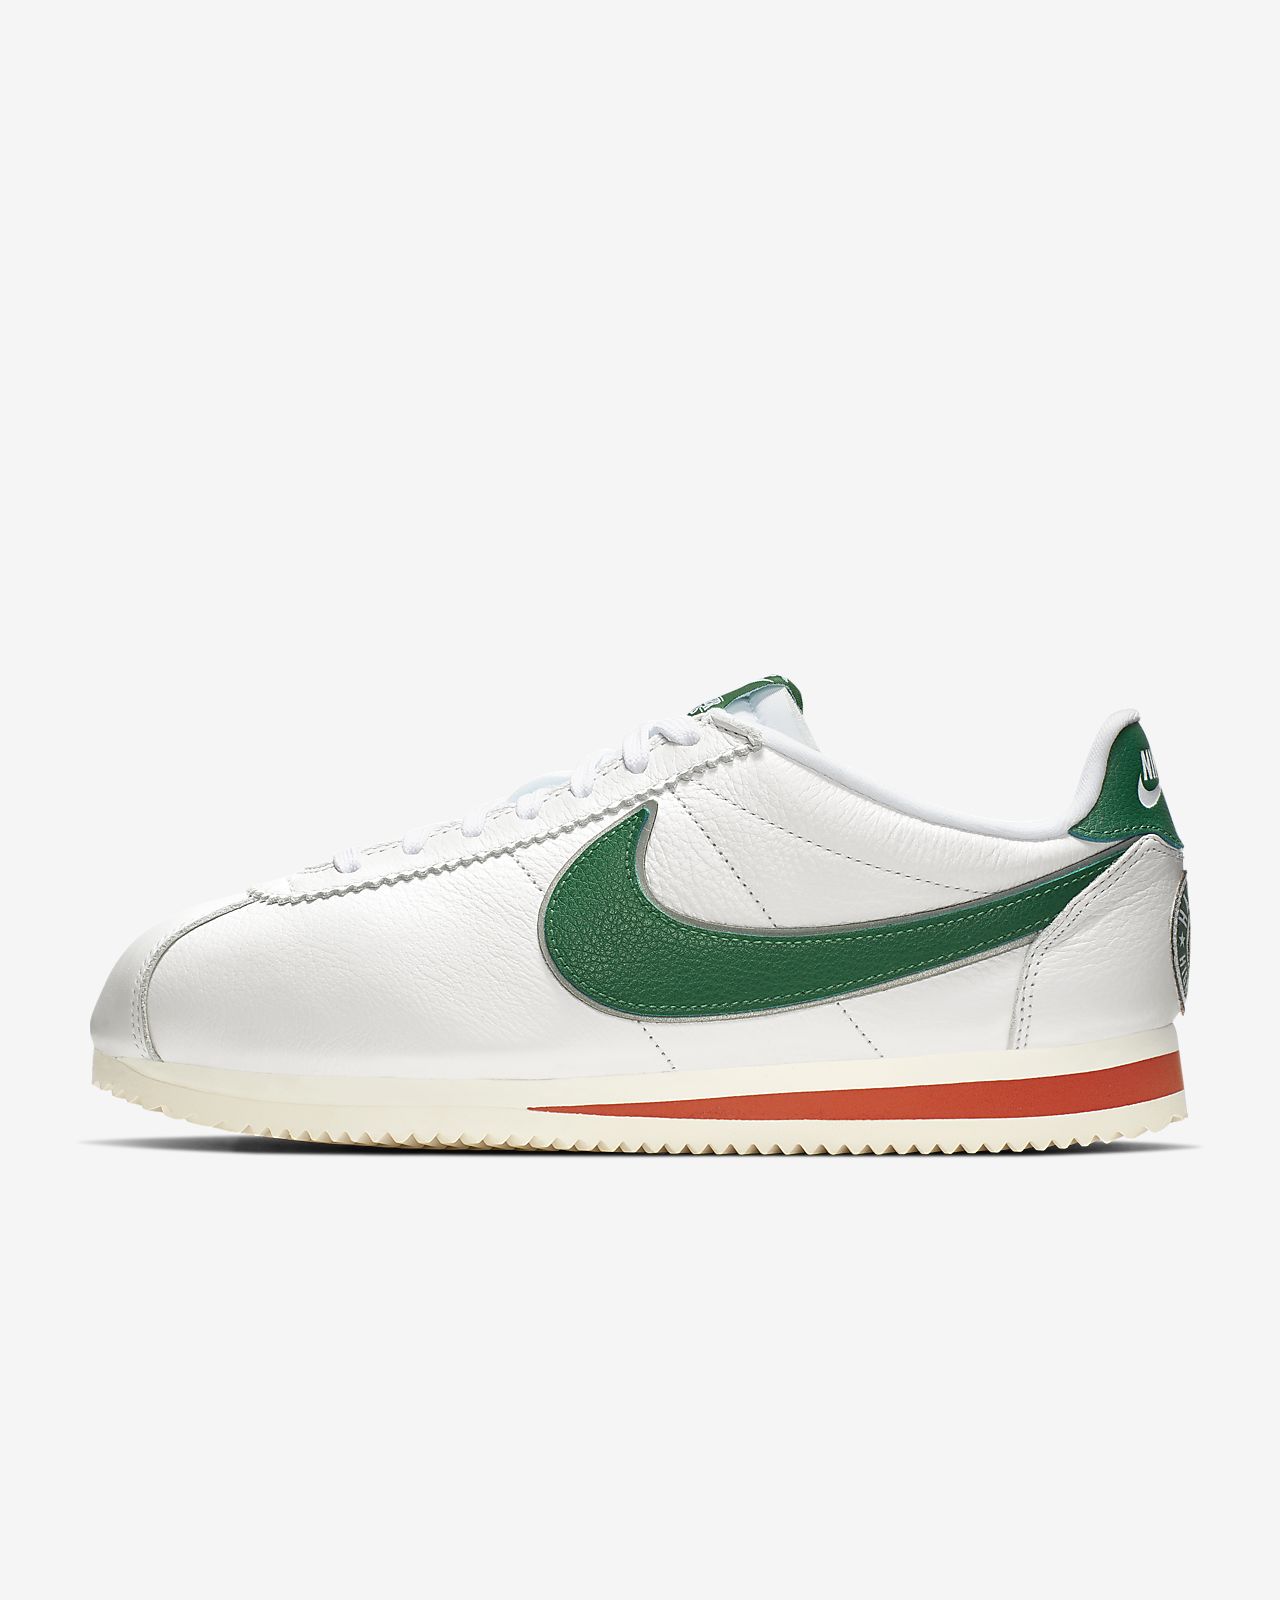 how much are nike cortez